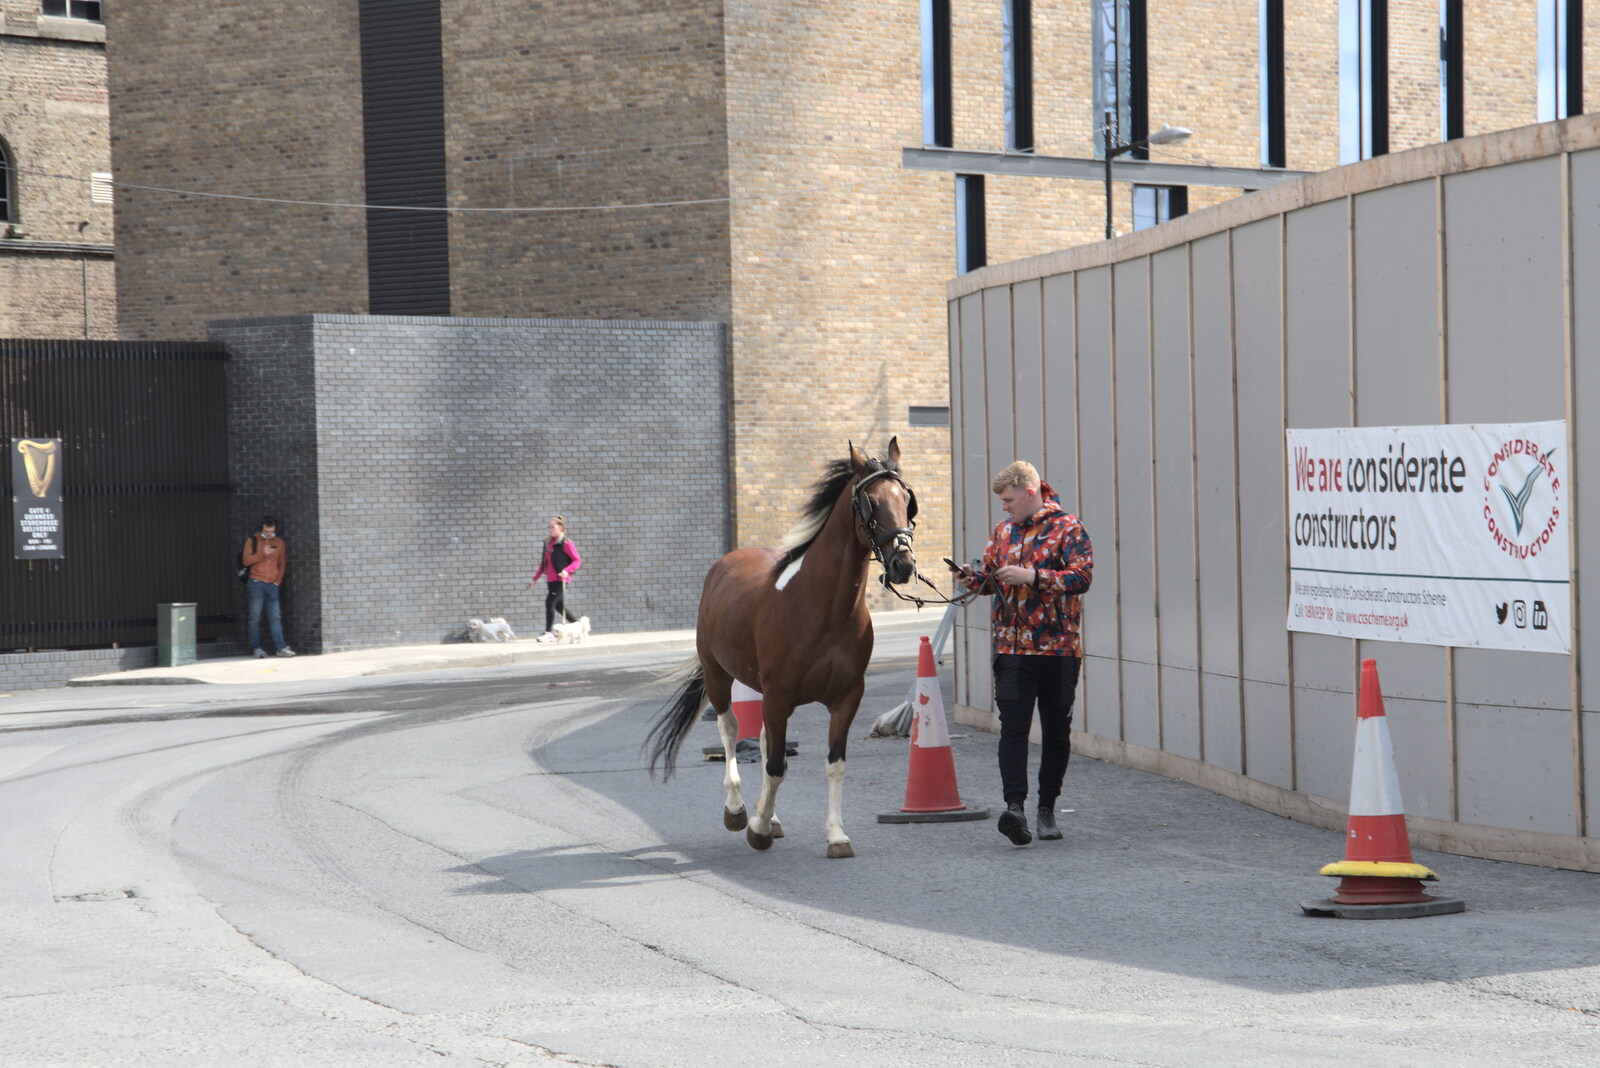 A horse goes for a walk from The Guinness Storehouse Tour, St. James's Gate, Dublin, Ireland - 17th August 2021